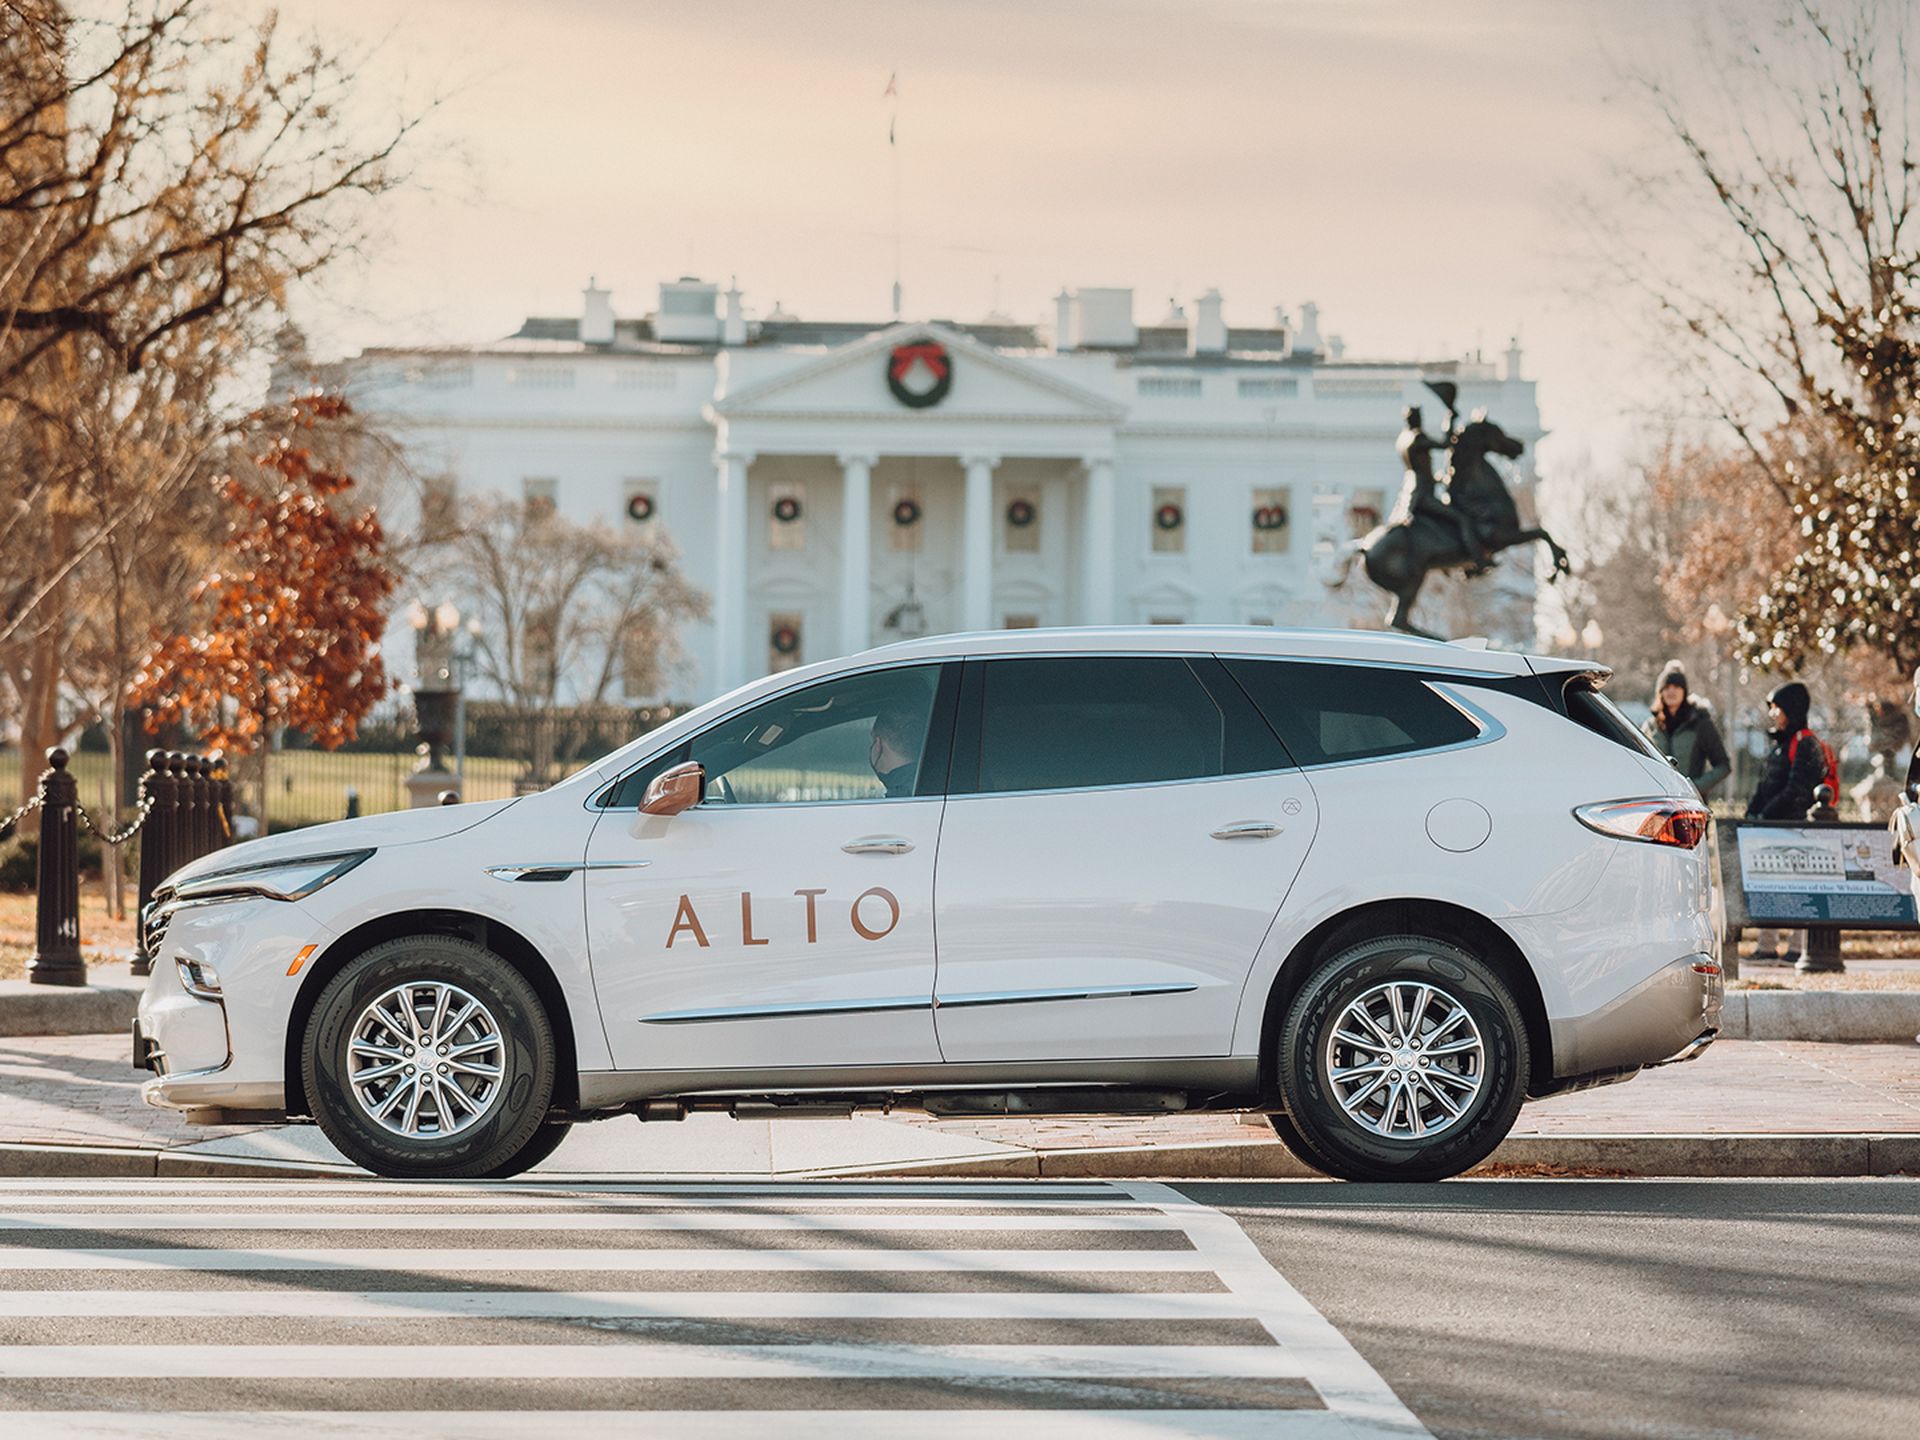 Alto's Art Cars Encourage People to Rideshare in Style